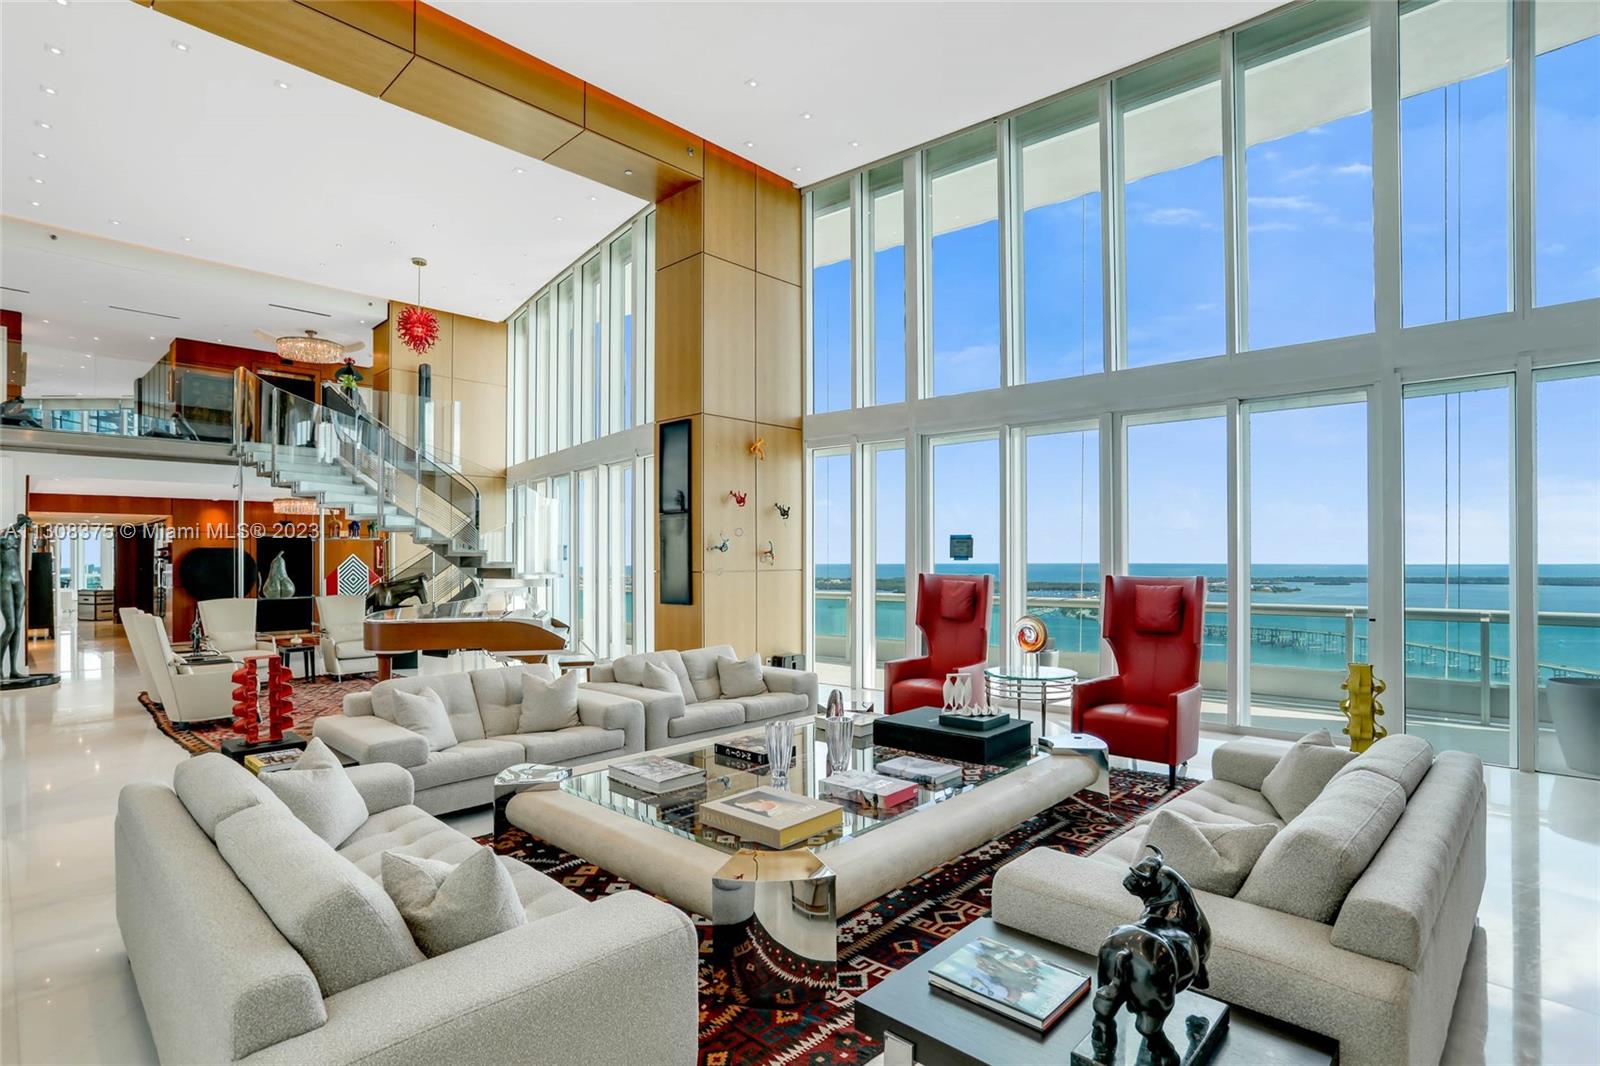 This is an absolutely gorgeous and stunning duplex  in the sky with 180 degree views of Biscayne Bay, Miami Beach, Fisher Island, Key Biscayne and beyond and city scape views from the west side.  Completely updated in the most exquisite taste and sophistication. All new marble floors. This is a home for the most cultured and elegant buyer. No expense was spared. Enjoy your own private pool , 4 assigned parking spaces (2063,2086,2087,2088) and storage #B-060. Marina slip #13 with dimensions 27' x 97' x 5'25'' fits up to a 90' yacht. This is a first class building offering privacy, full services and an outstanding way of life! To see it is to want it!